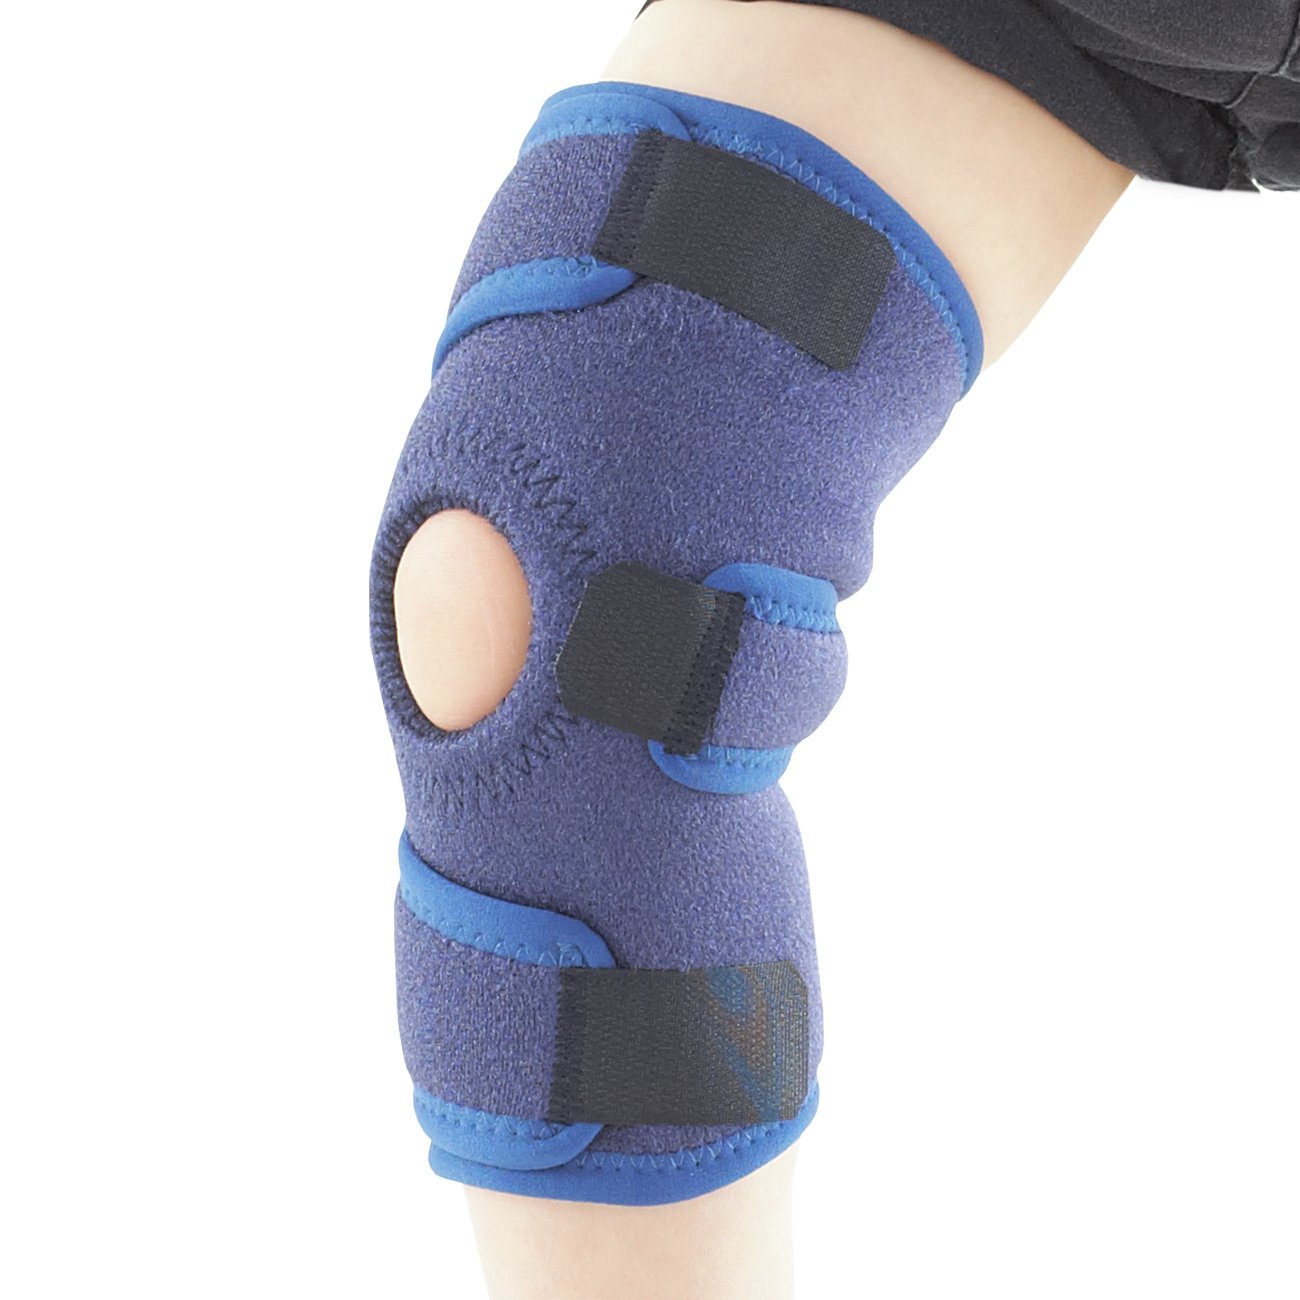 Neo G Kids Open Knee Support review